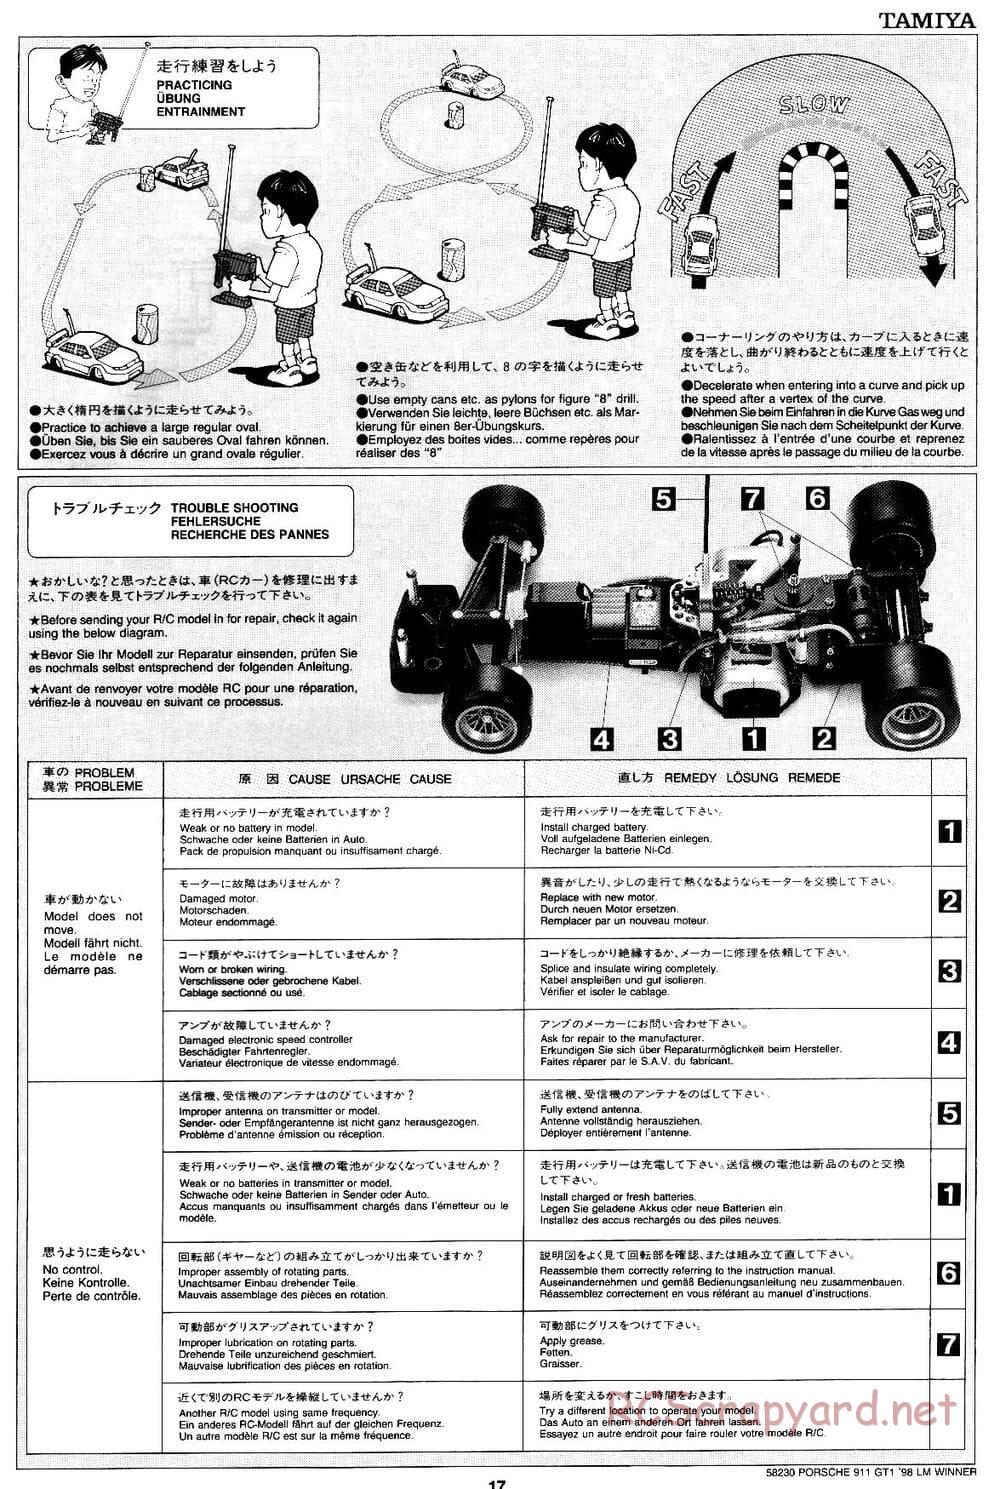 Tamiya - Porsche 911 GT1 98 LM Winner - F103RS Chassis - Manual - Page 17